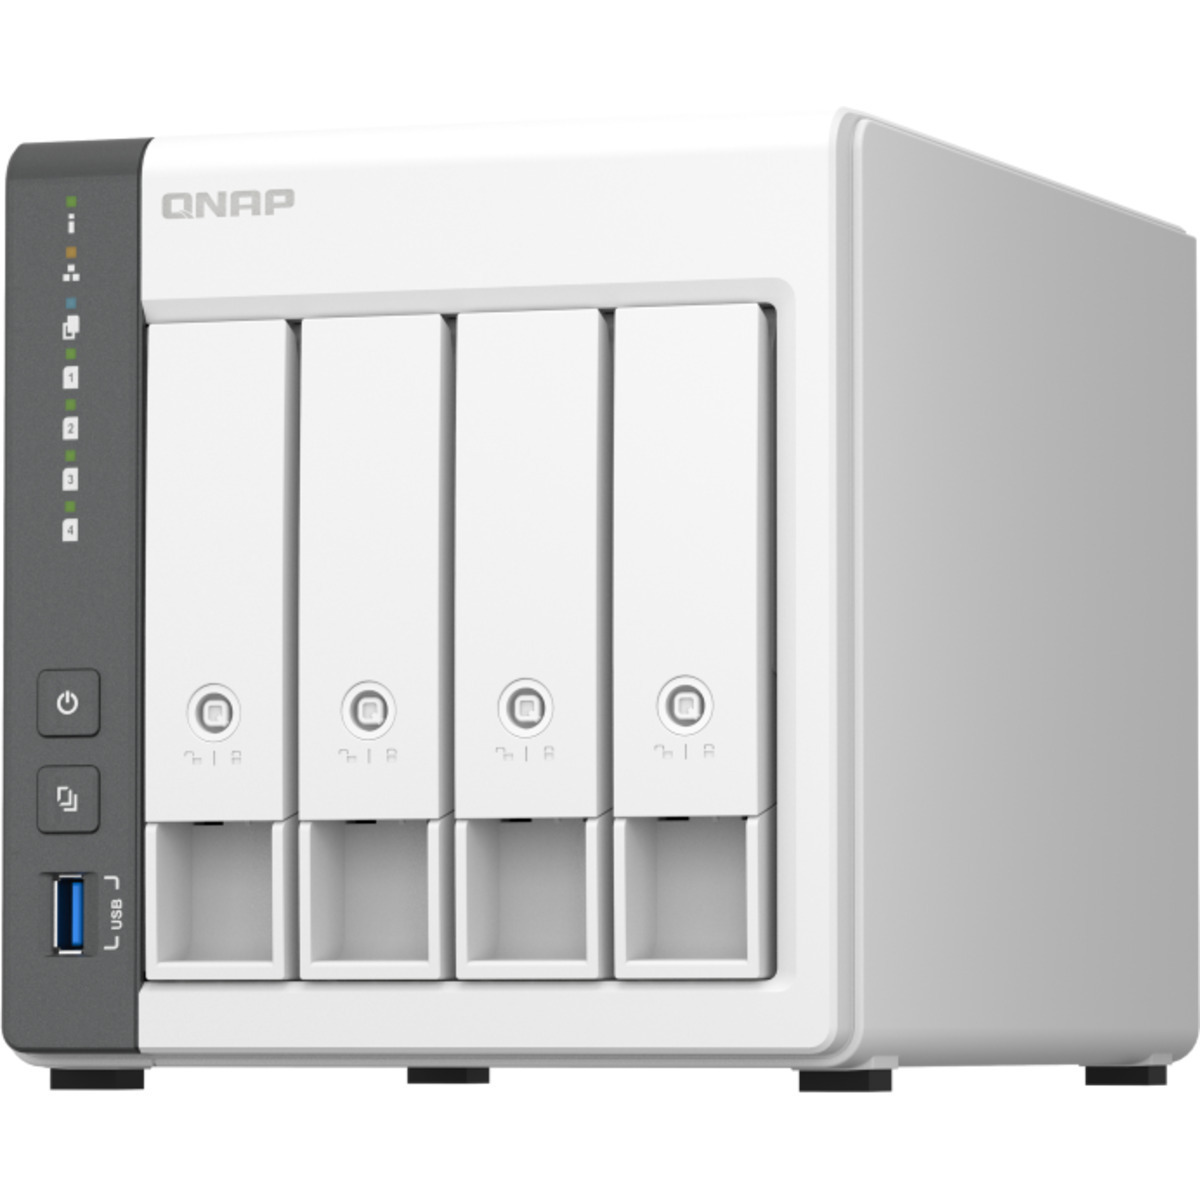 QNAP TS-433 24tb 4-Bay Desktop Personal / Basic Home / Small Office NAS - Network Attached Storage Device 4x6tb Western Digital Red Plus WD60EFPX 3.5 5640rpm SATA 6Gb/s HDD NAS Class Drives Installed - Burn-In Tested TS-433